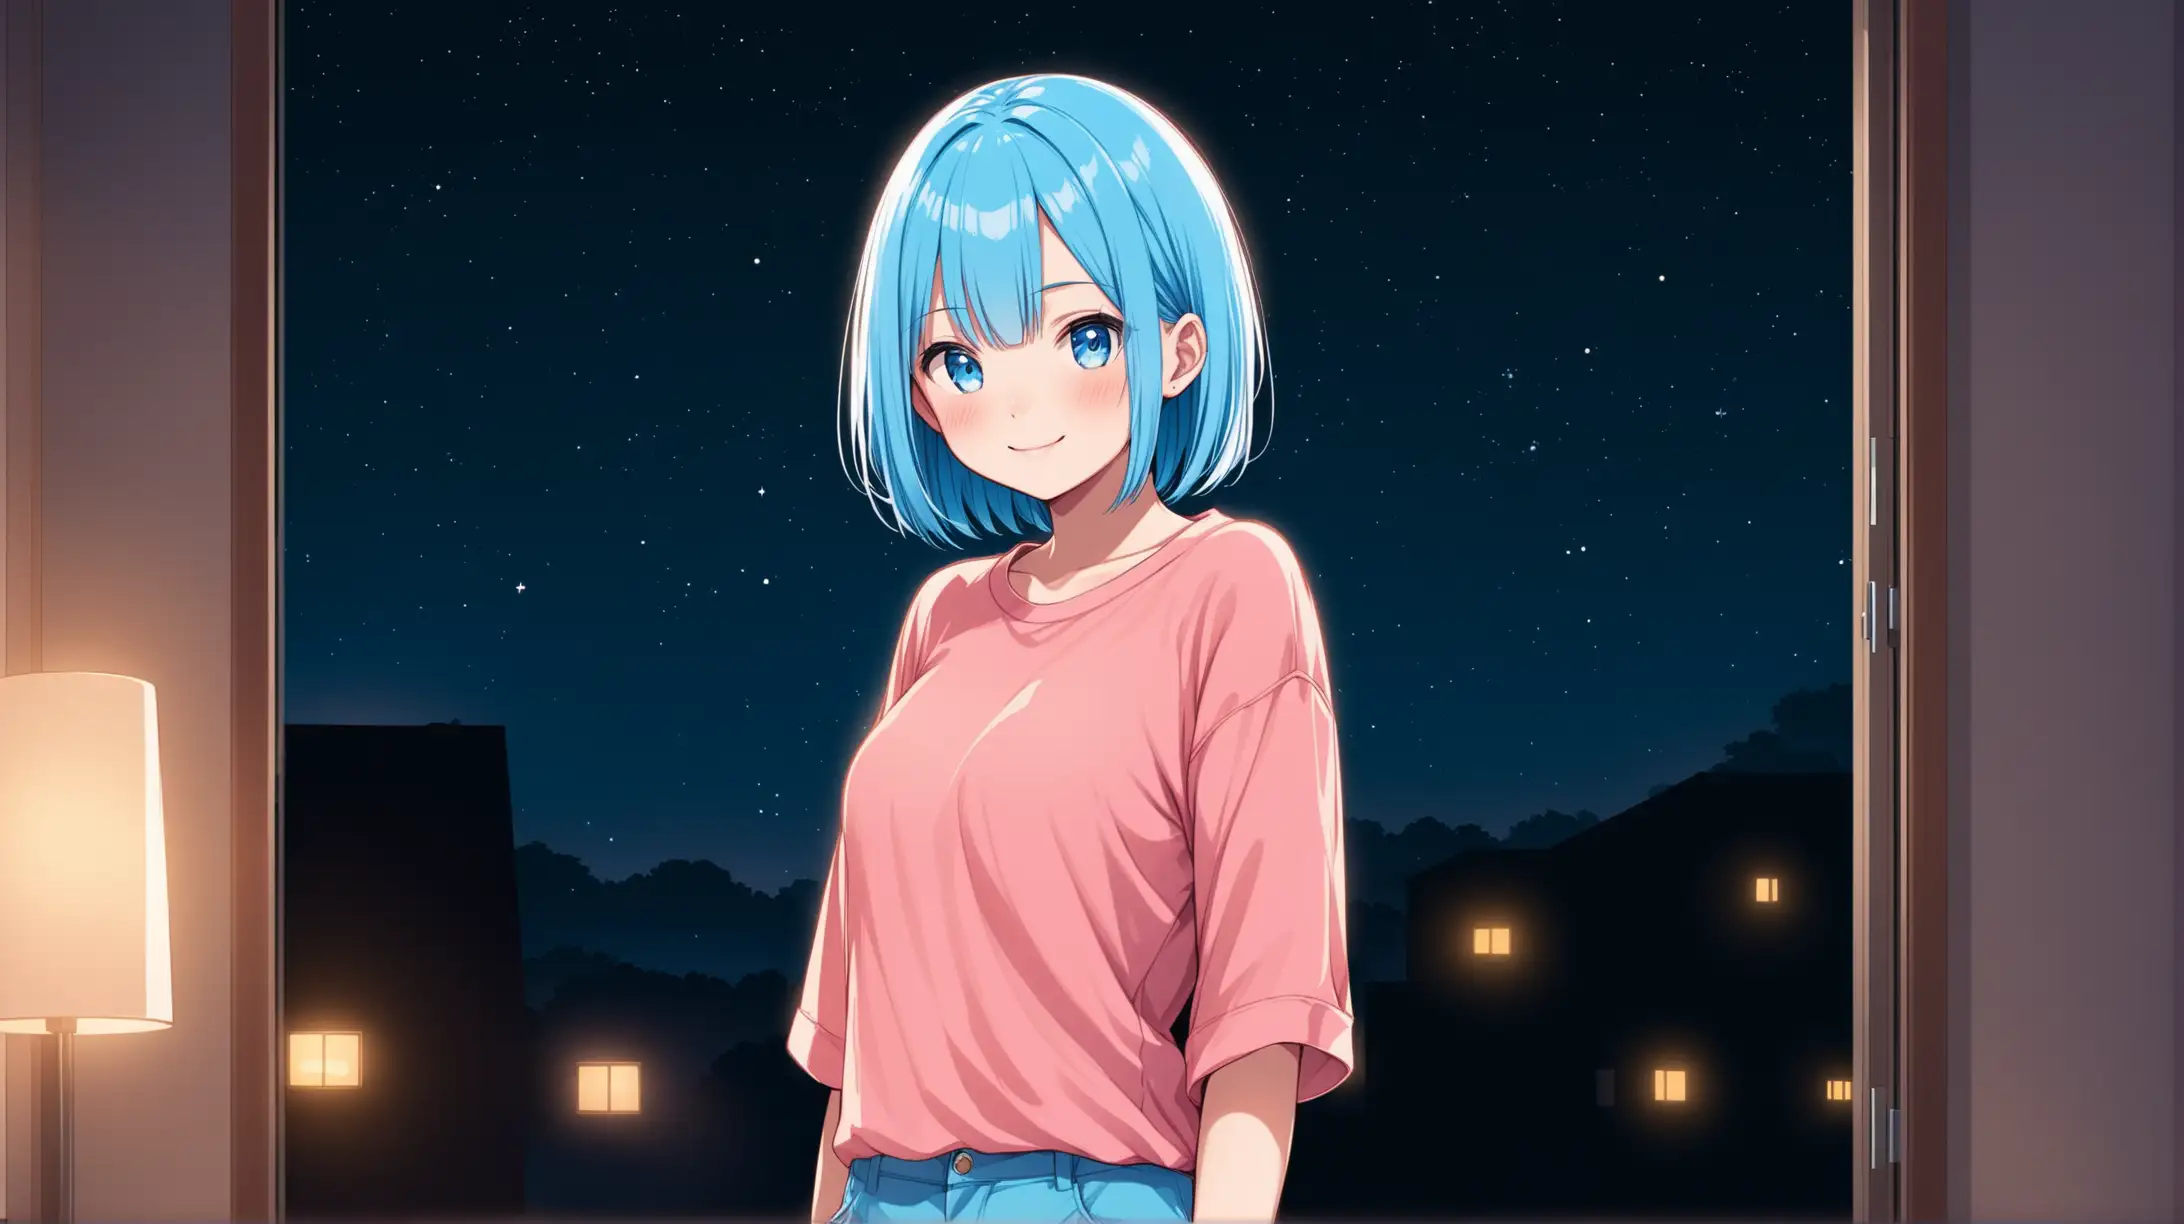 Draw the character Rem standing indoors at night while she is wearing casual clothes and smiling at the viewer